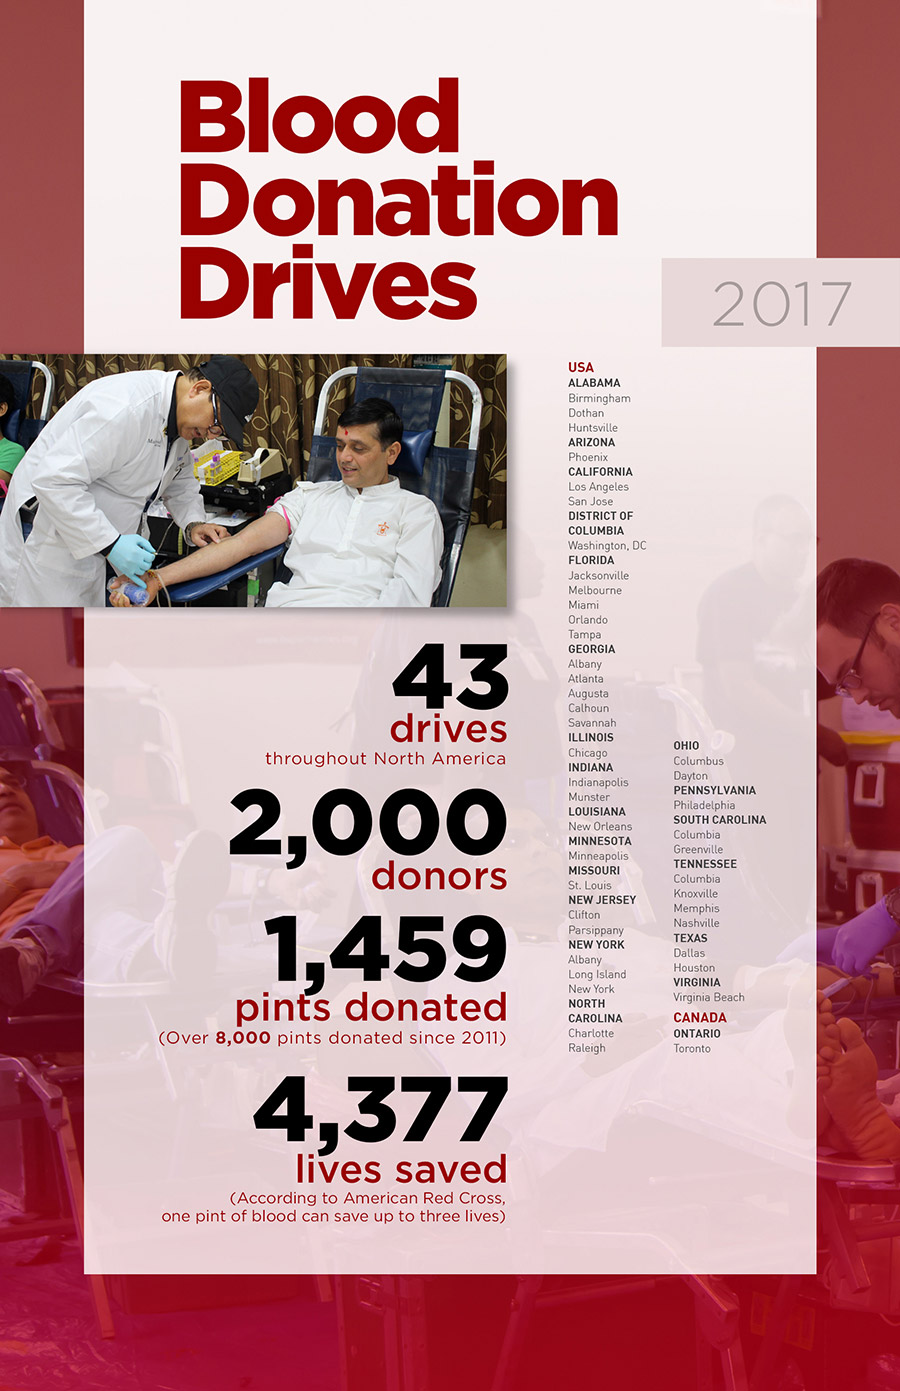 Blood Donation Drive - North American Activities Annual Report 2017